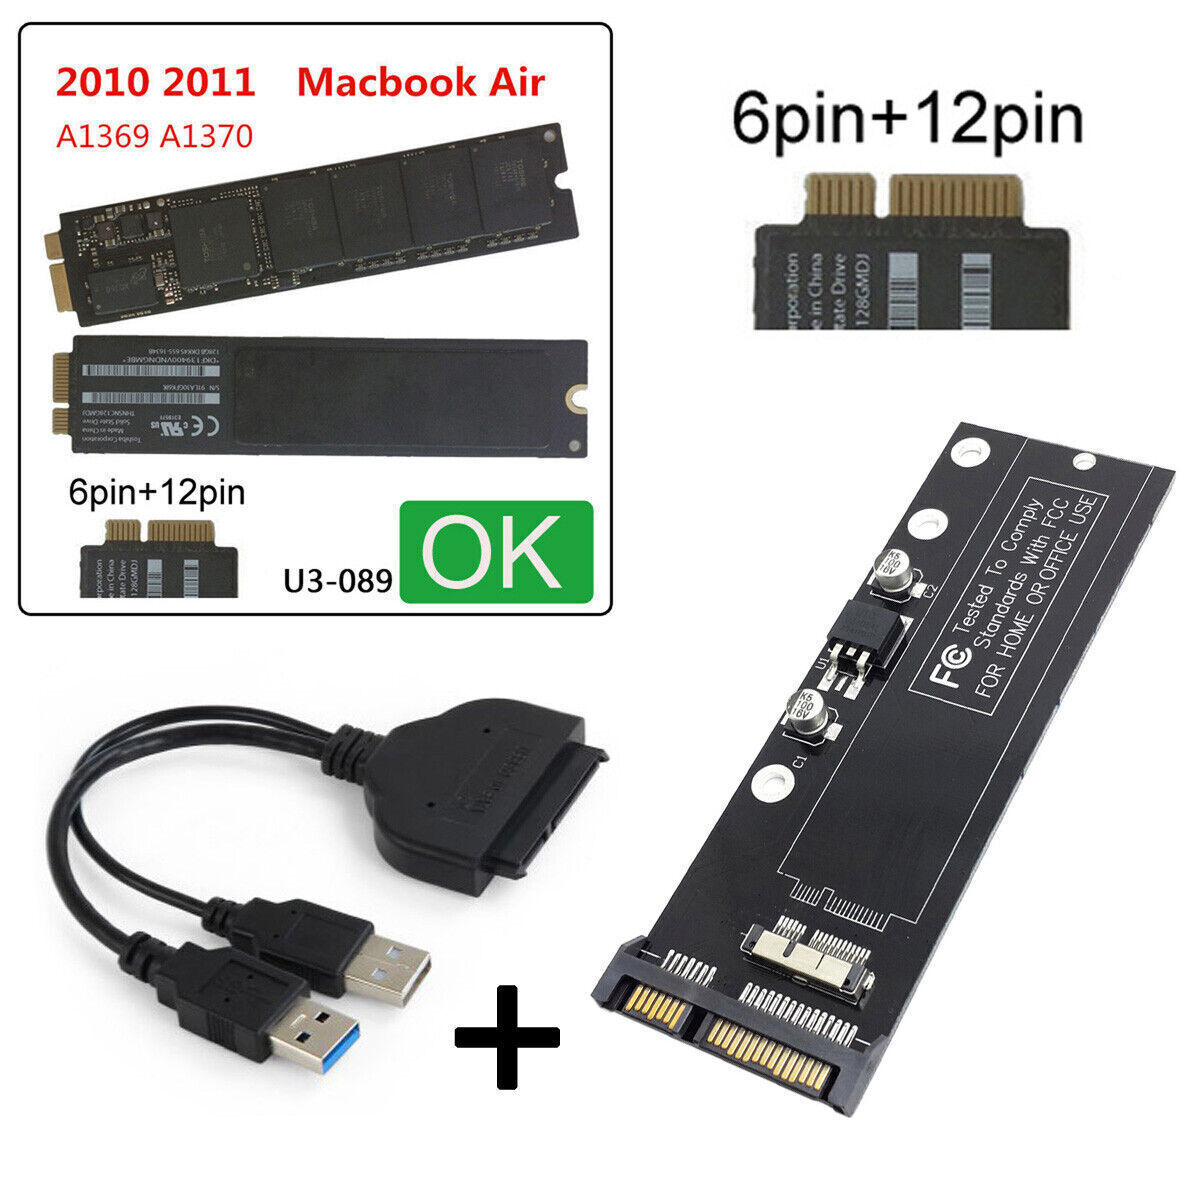 12+6pin SSD  HDD -USB 3.0 Hard Disk Drive for 2010 2011 Macbook Air A1369 A1370